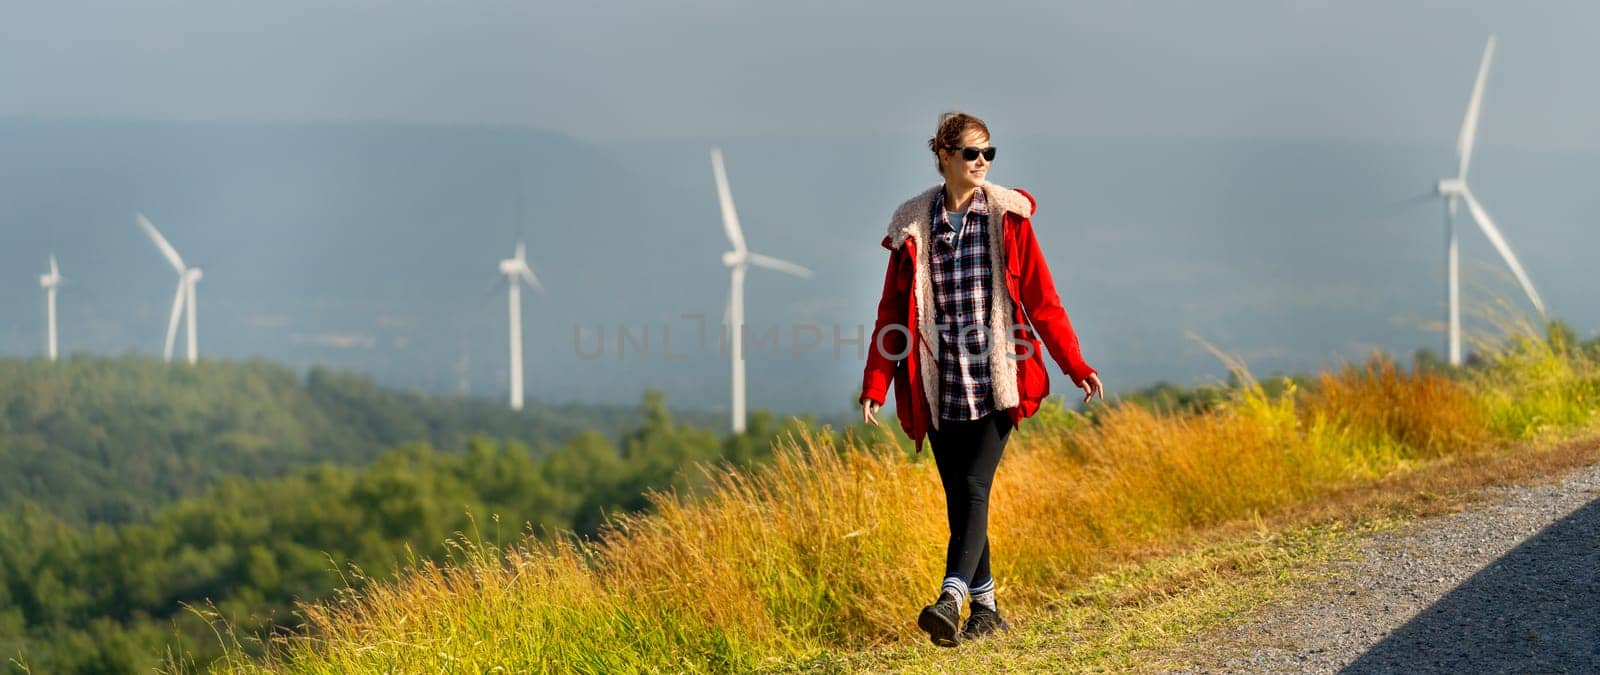 Caucasian woman with red coad and sunglasses walk along the roadside near the meadow and wind turbines or windmill with warm morning light. by nrradmin